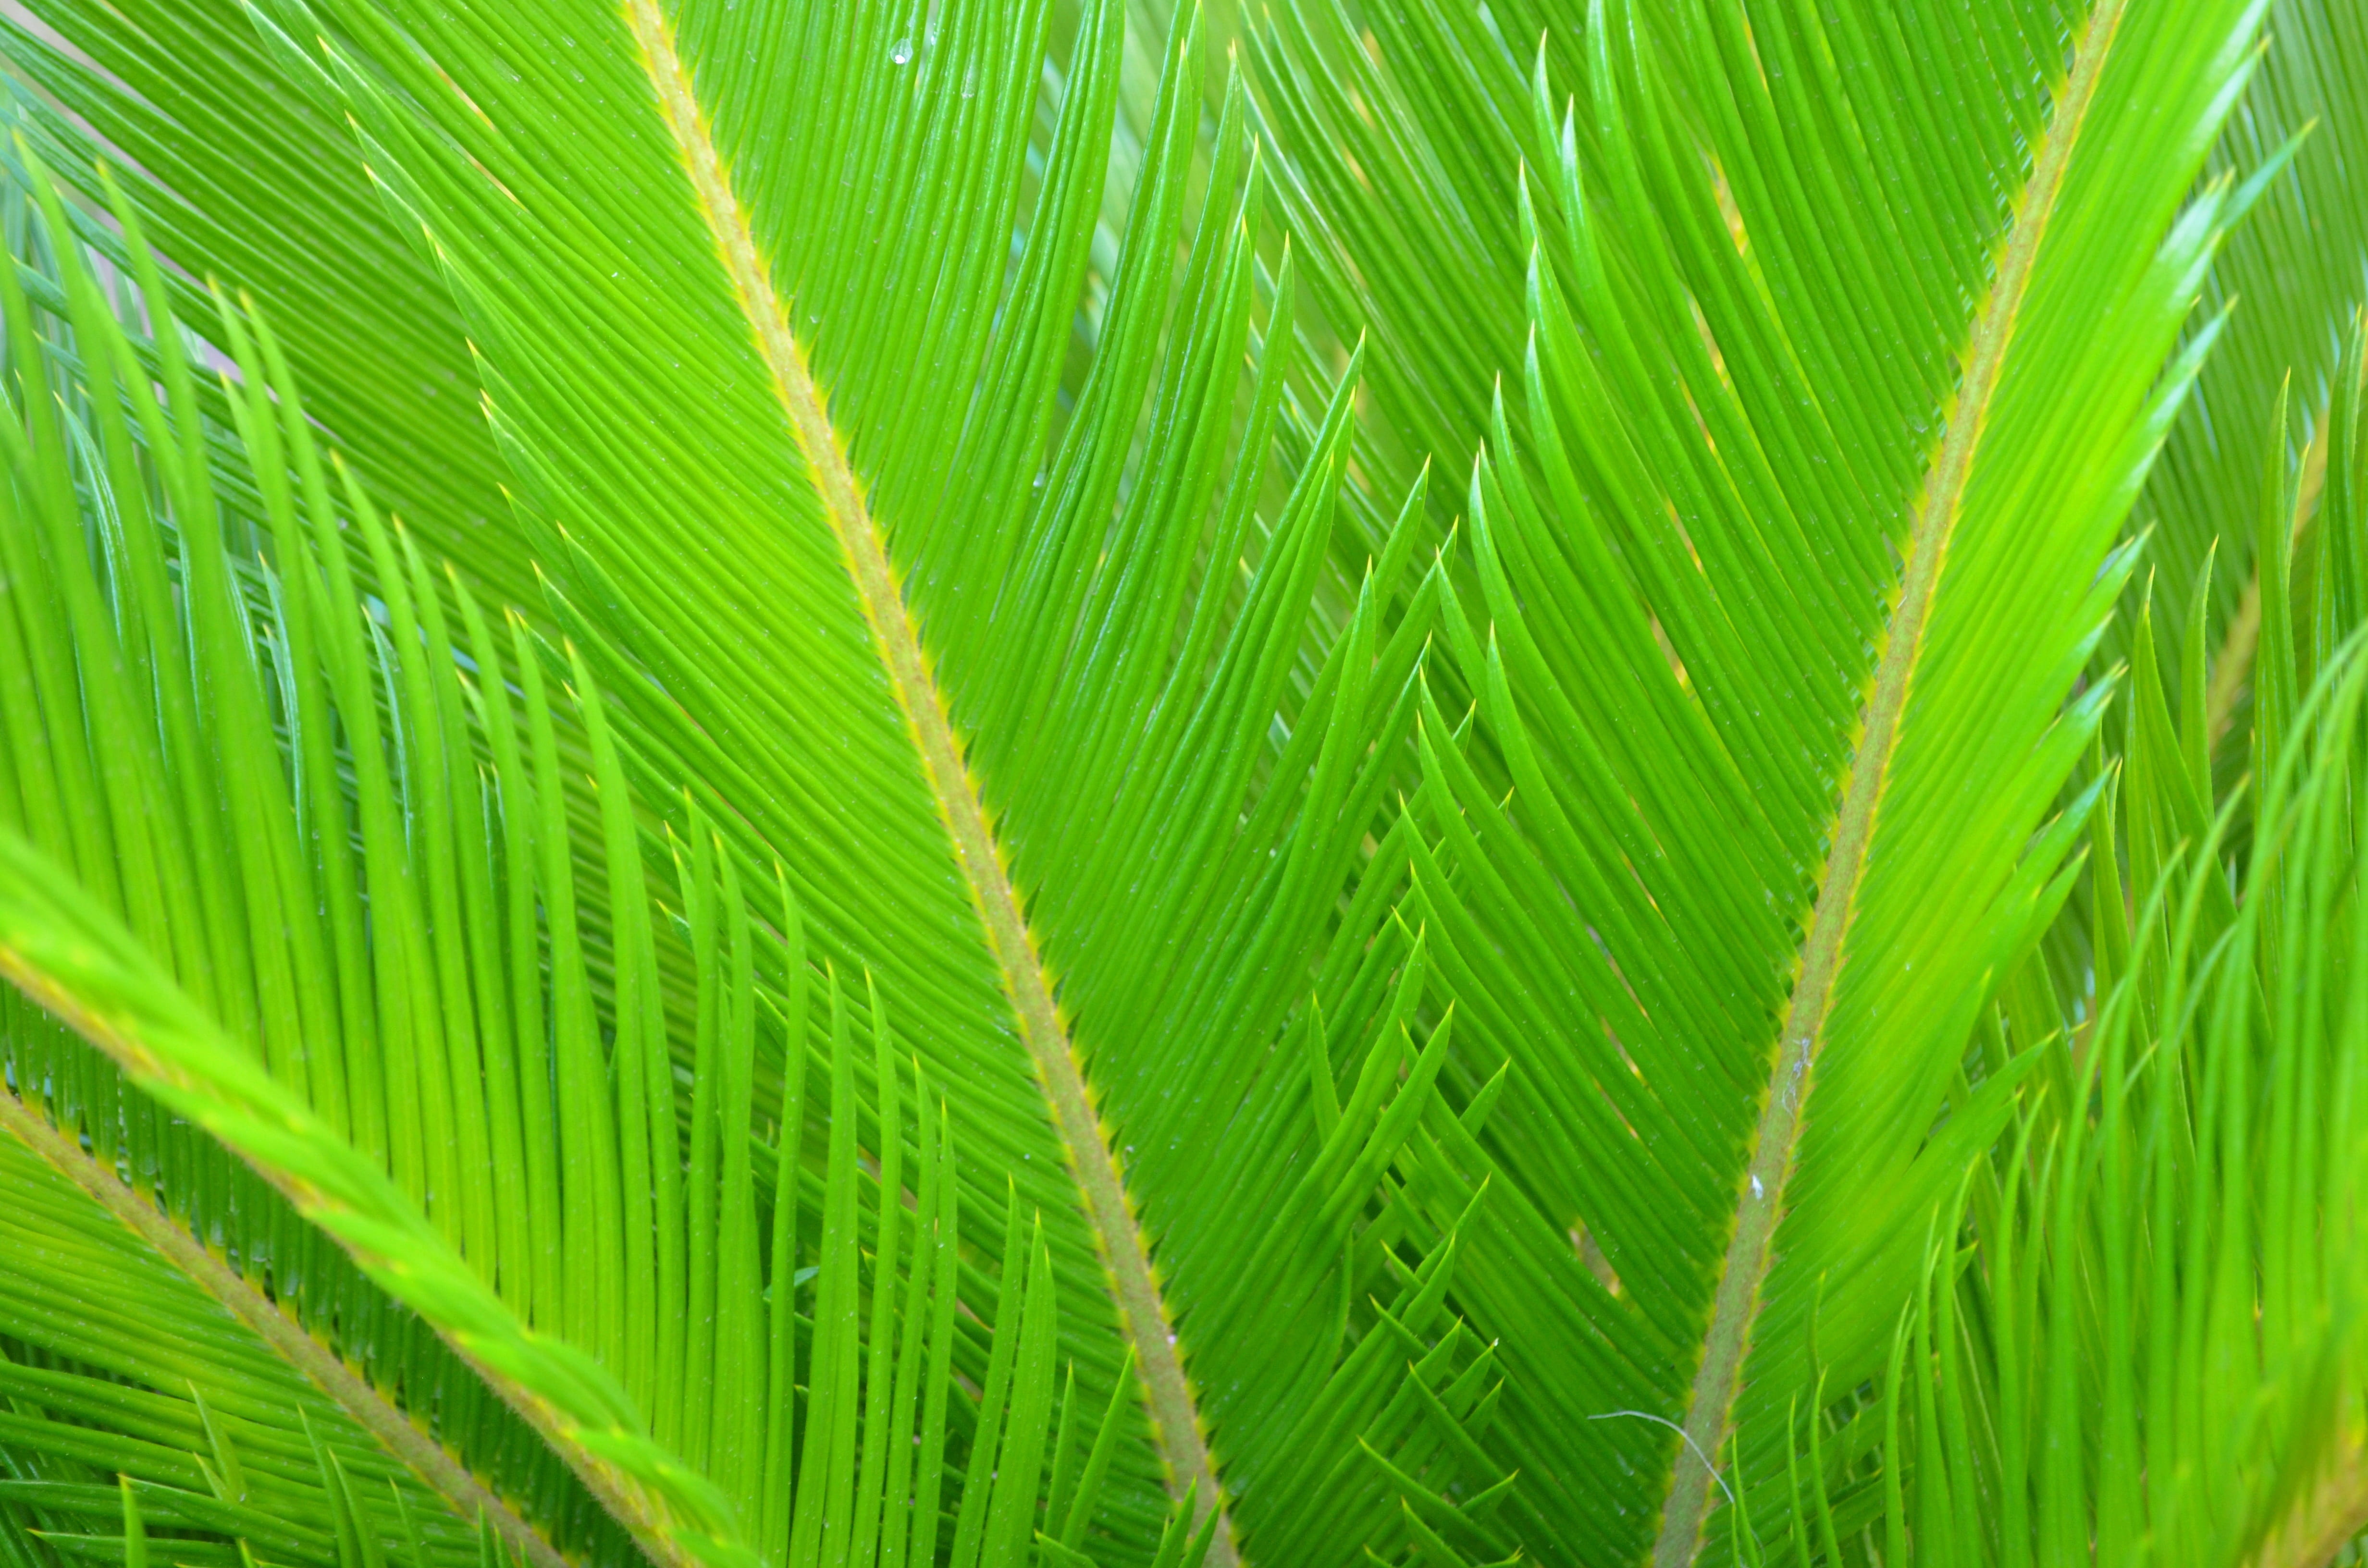 cycads, plants, green, leaf, green color, plant part, backgrounds